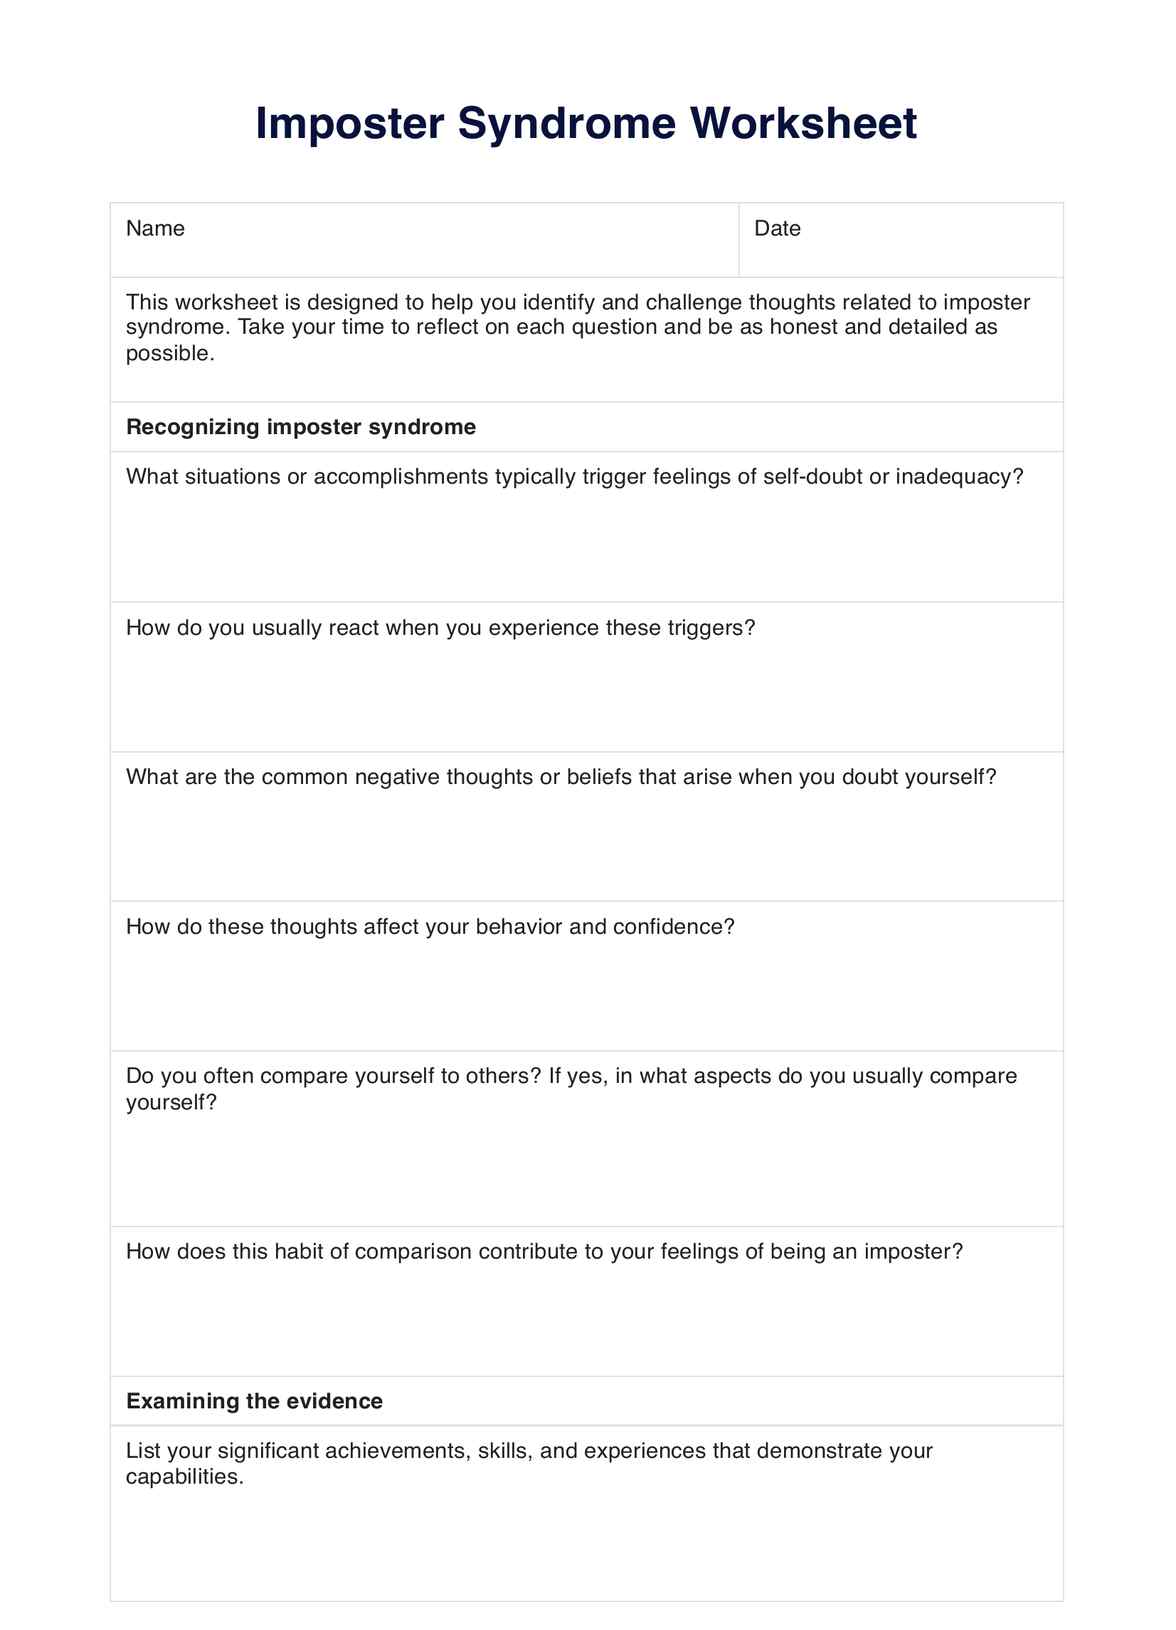 Imposter Syndrome Worksheet PDF Example